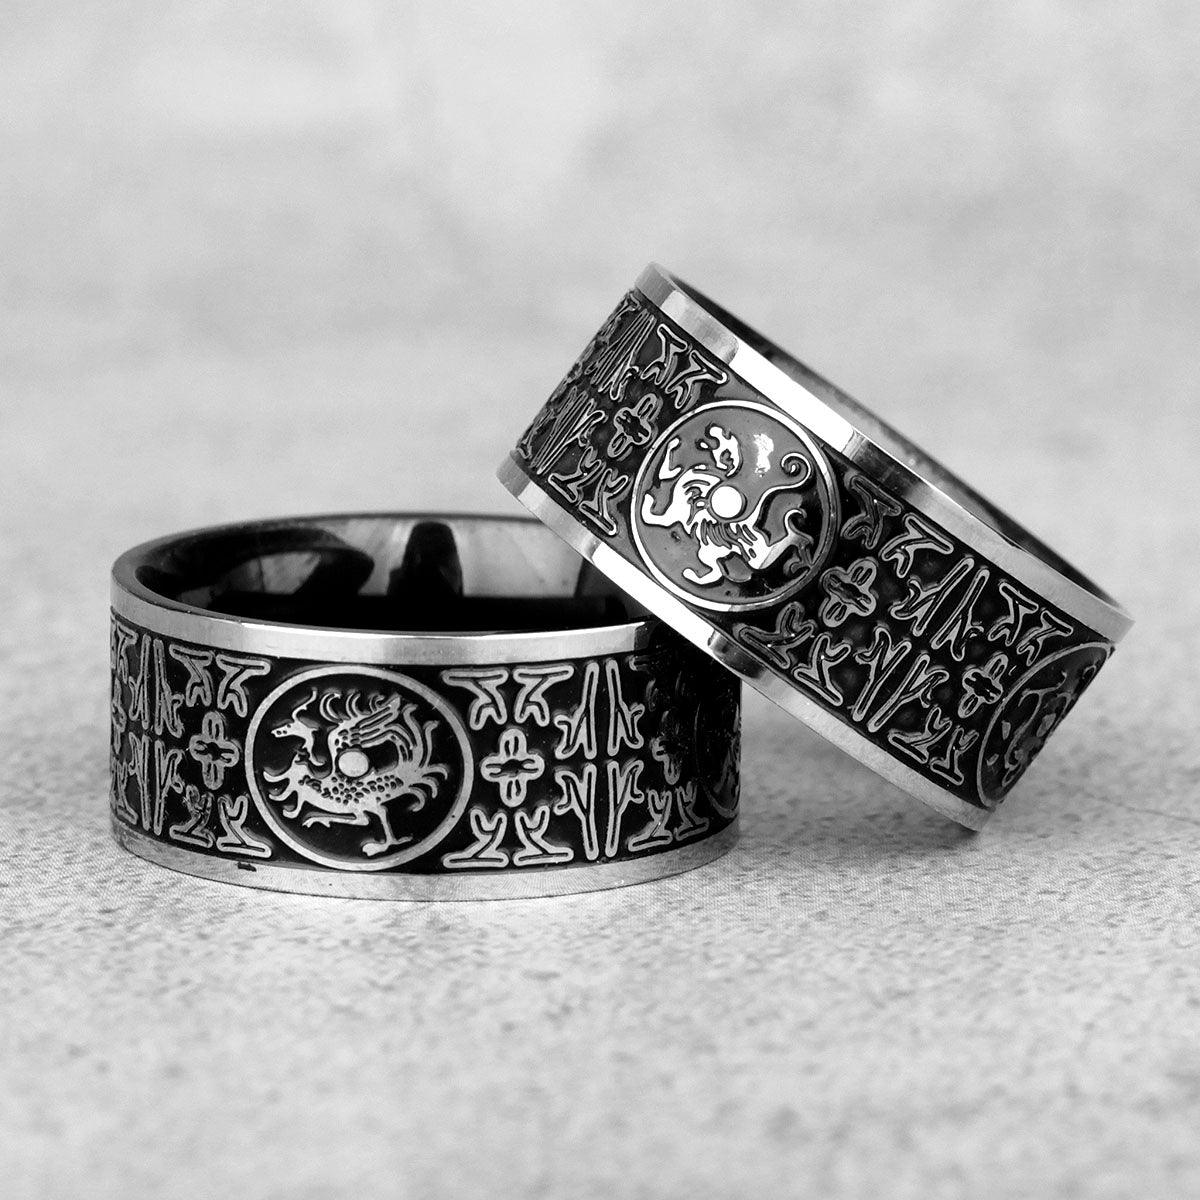 Amulet Chinese Beasts Good Luck Stainless Steel Mens Rings Punk Cool for Male Boyfriend Biker Jewelry Creativity Gift Wholesale